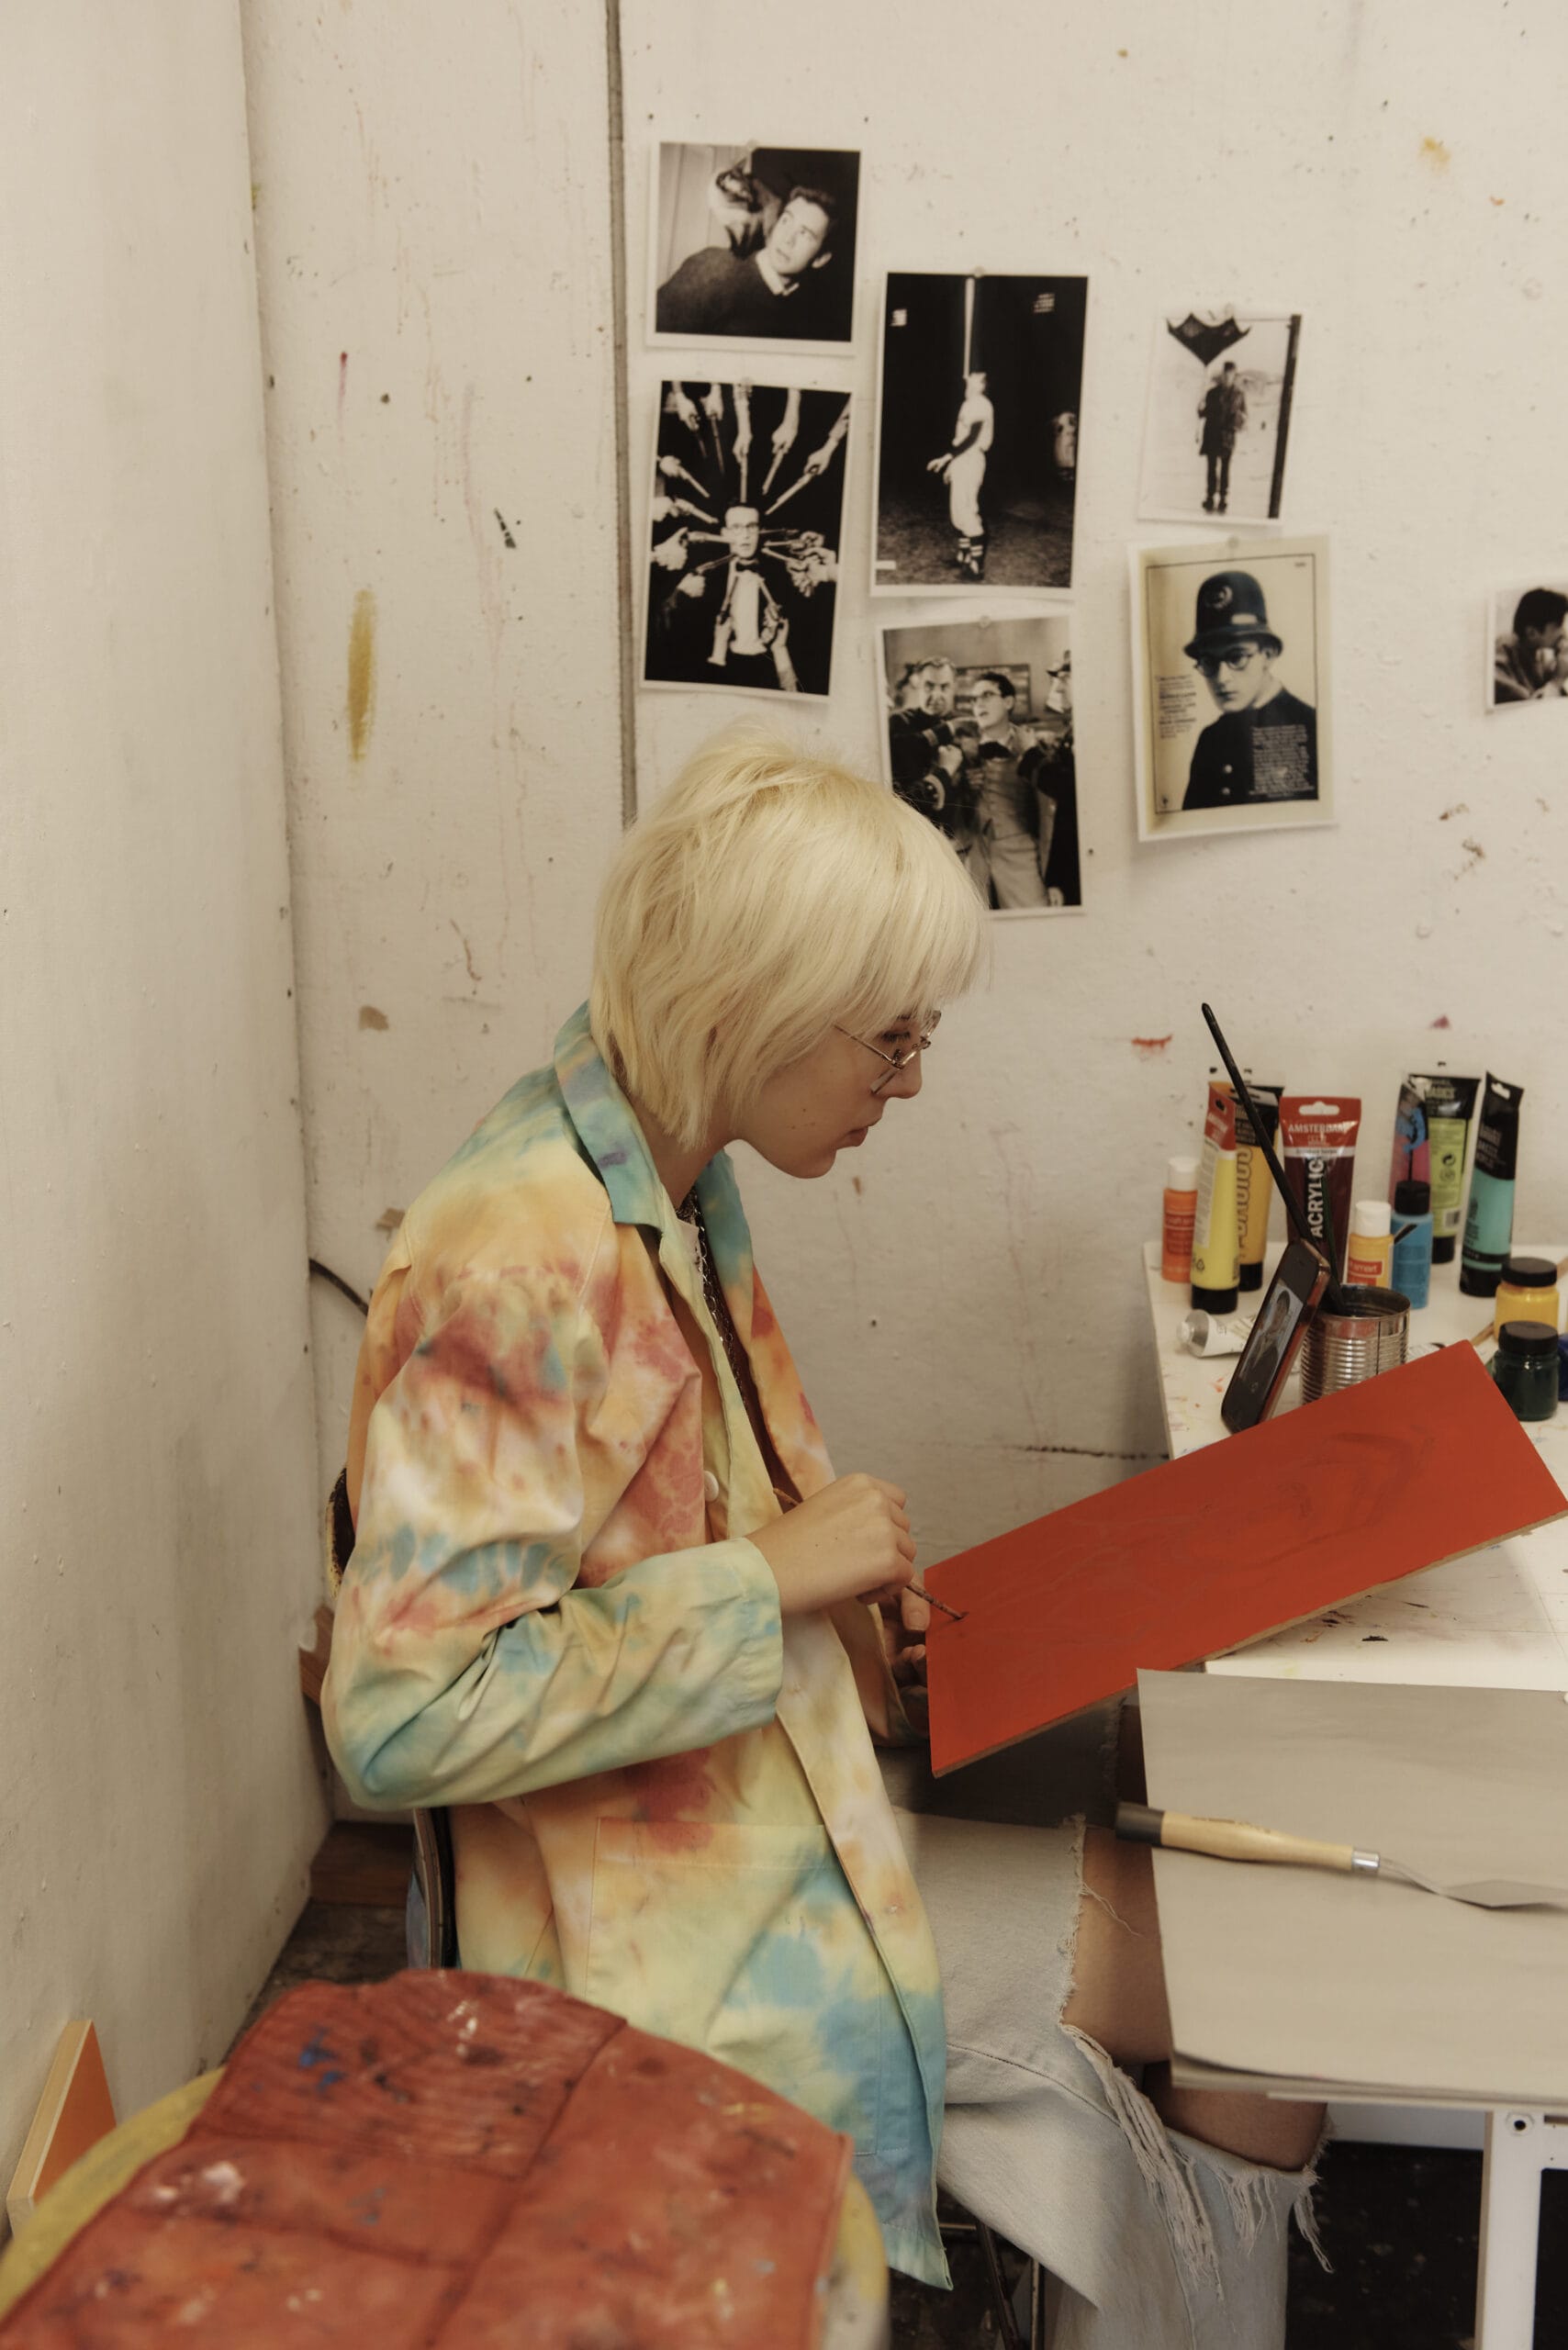 A woman sits at a red canvas, painting in her studio.